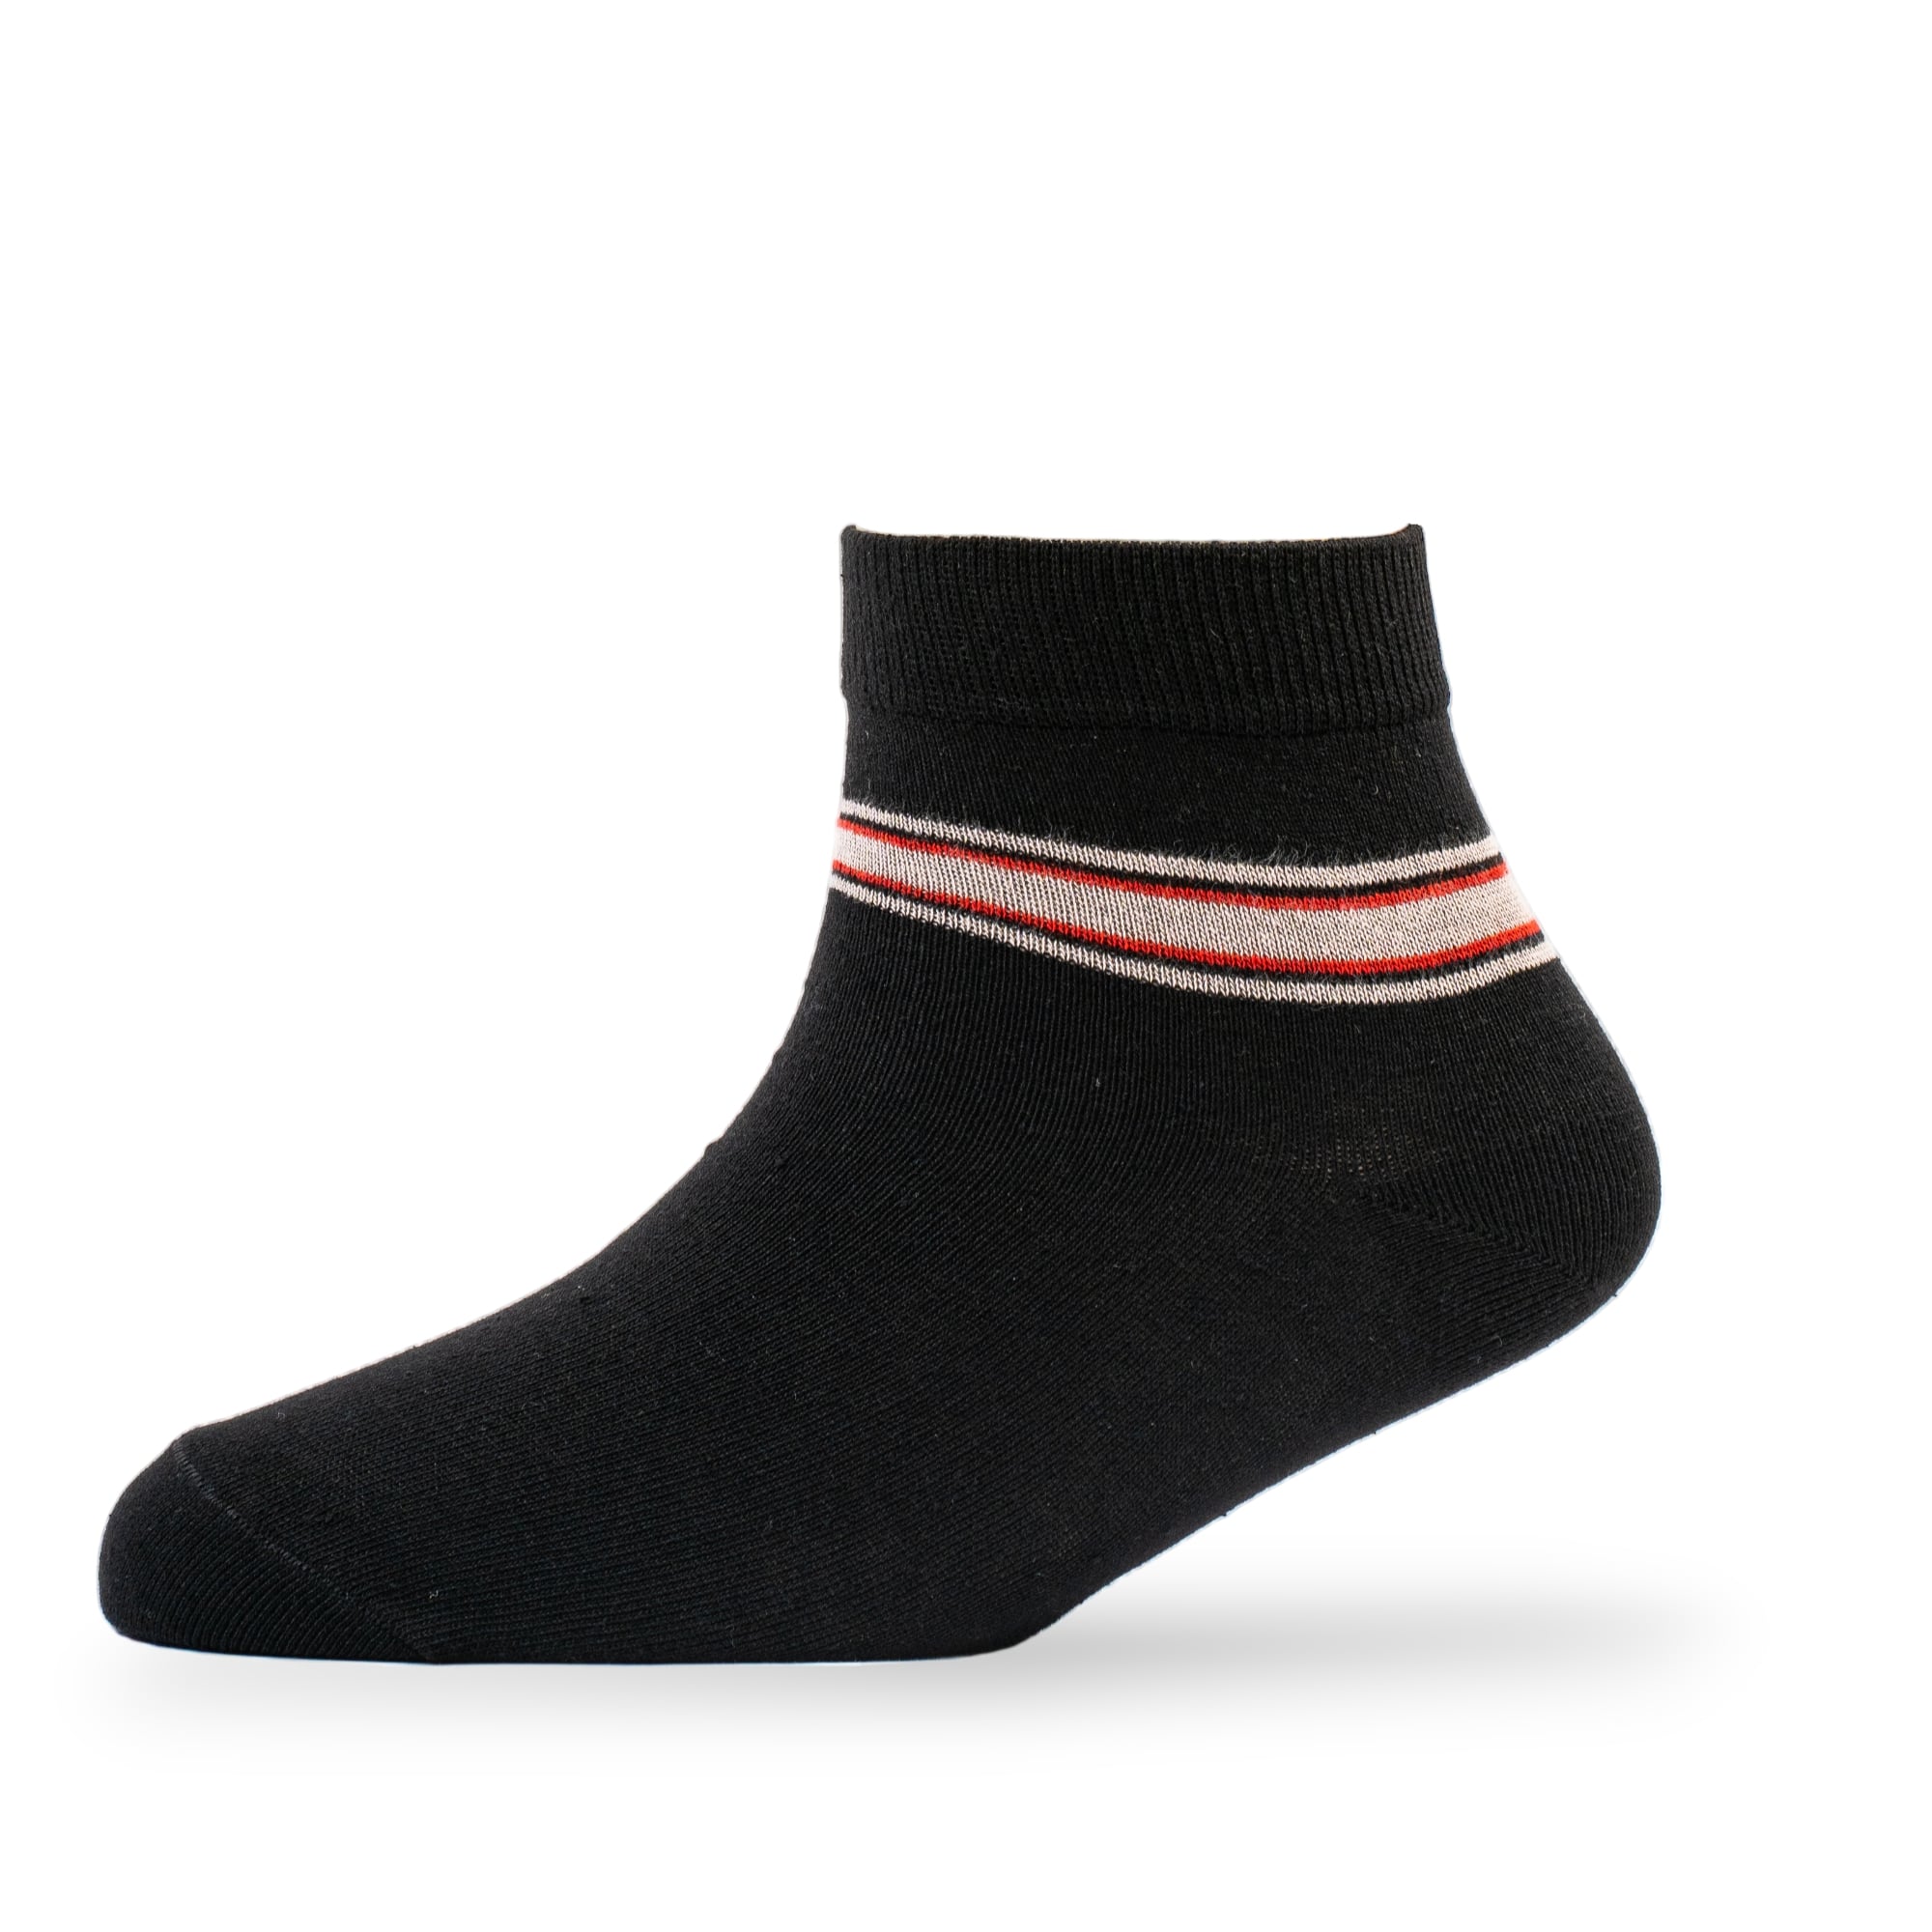 Young Wings Men's Multi Colour Cotton Fabric Stripe Ankle Length Socks - Pack of 5, Style no. M1-2141 N